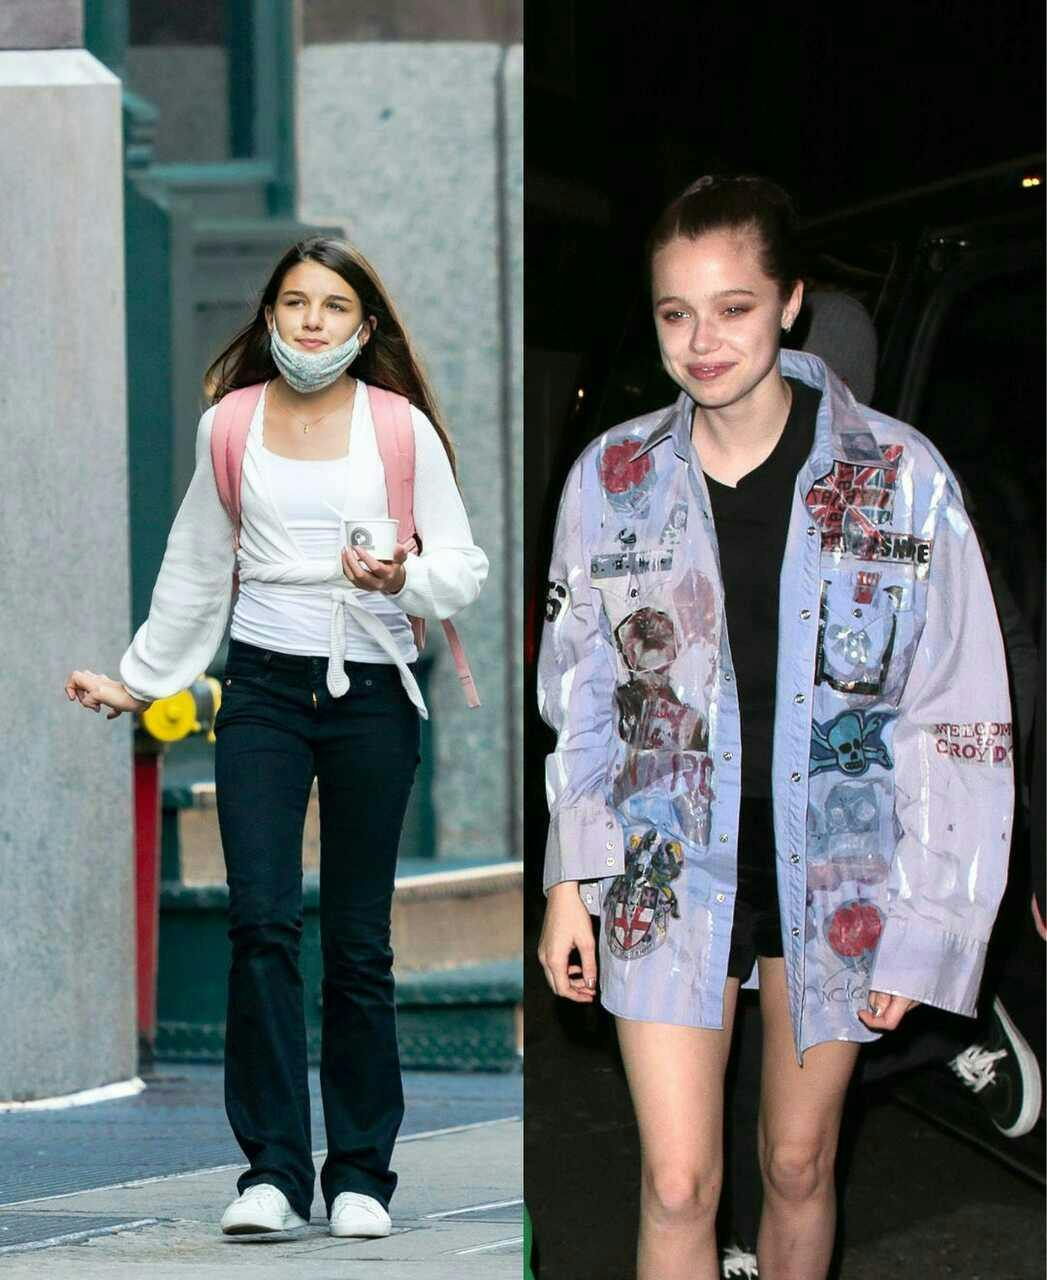 clothing coat person female girl teen face head